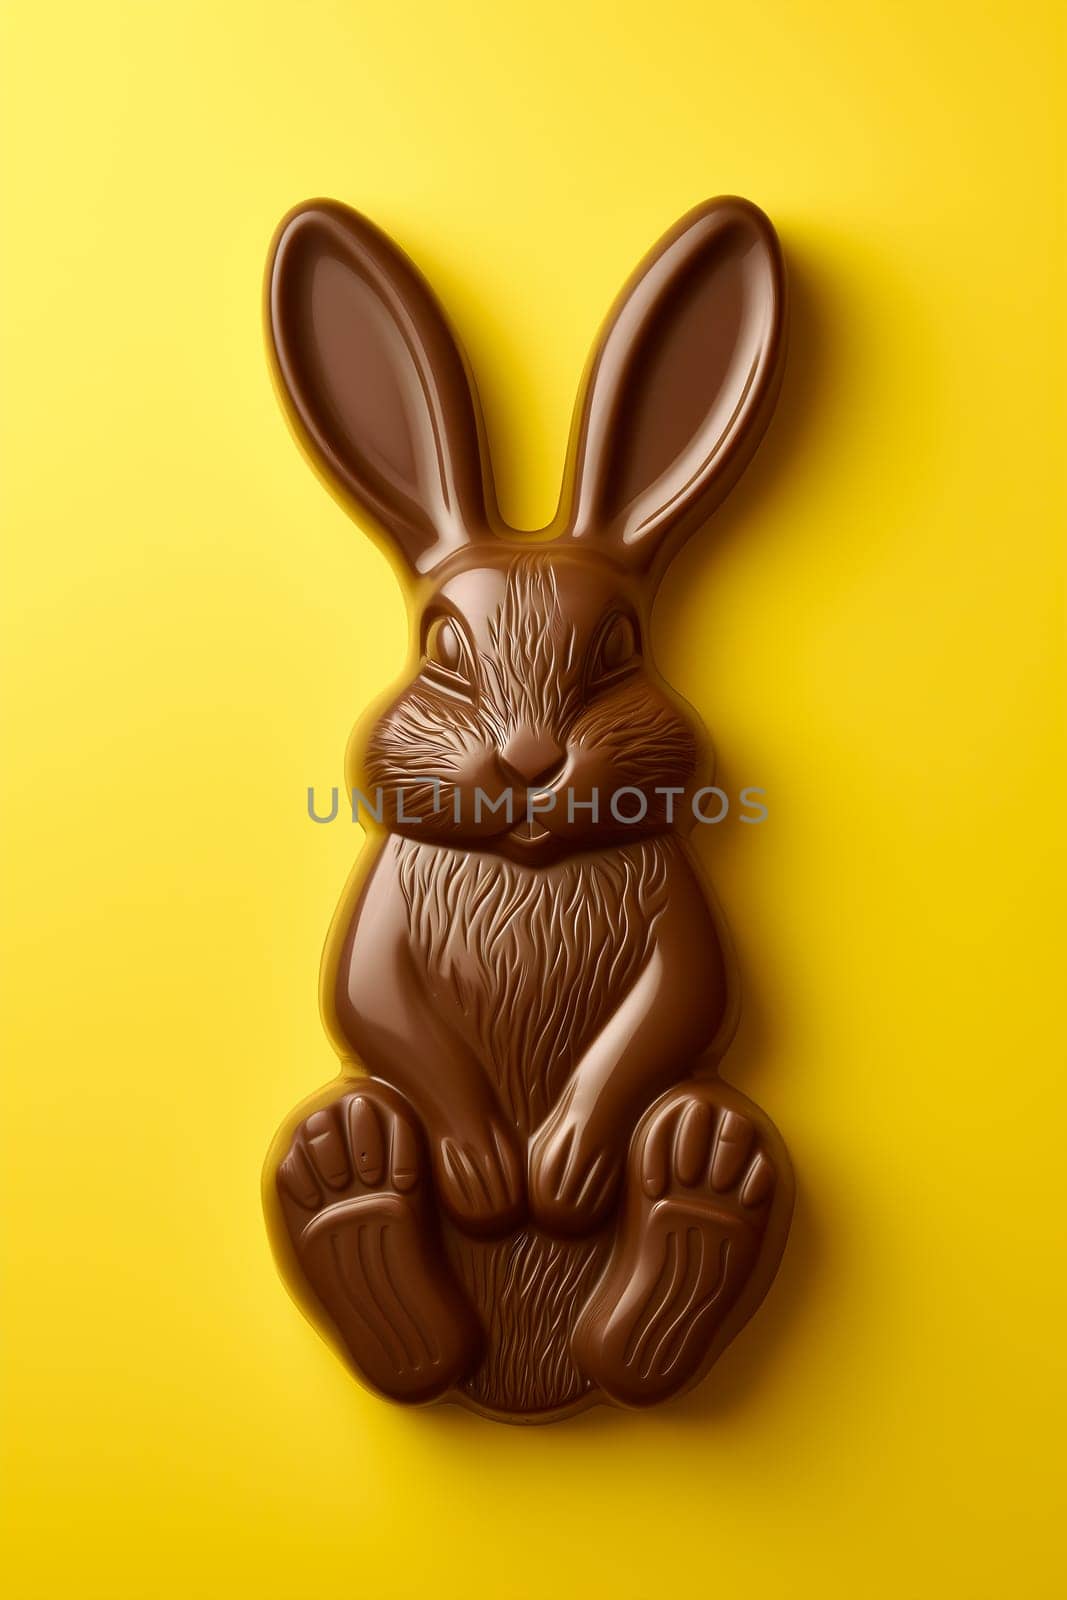 Chocolate Bunny on Vibrant Yellow Background by chrisroll